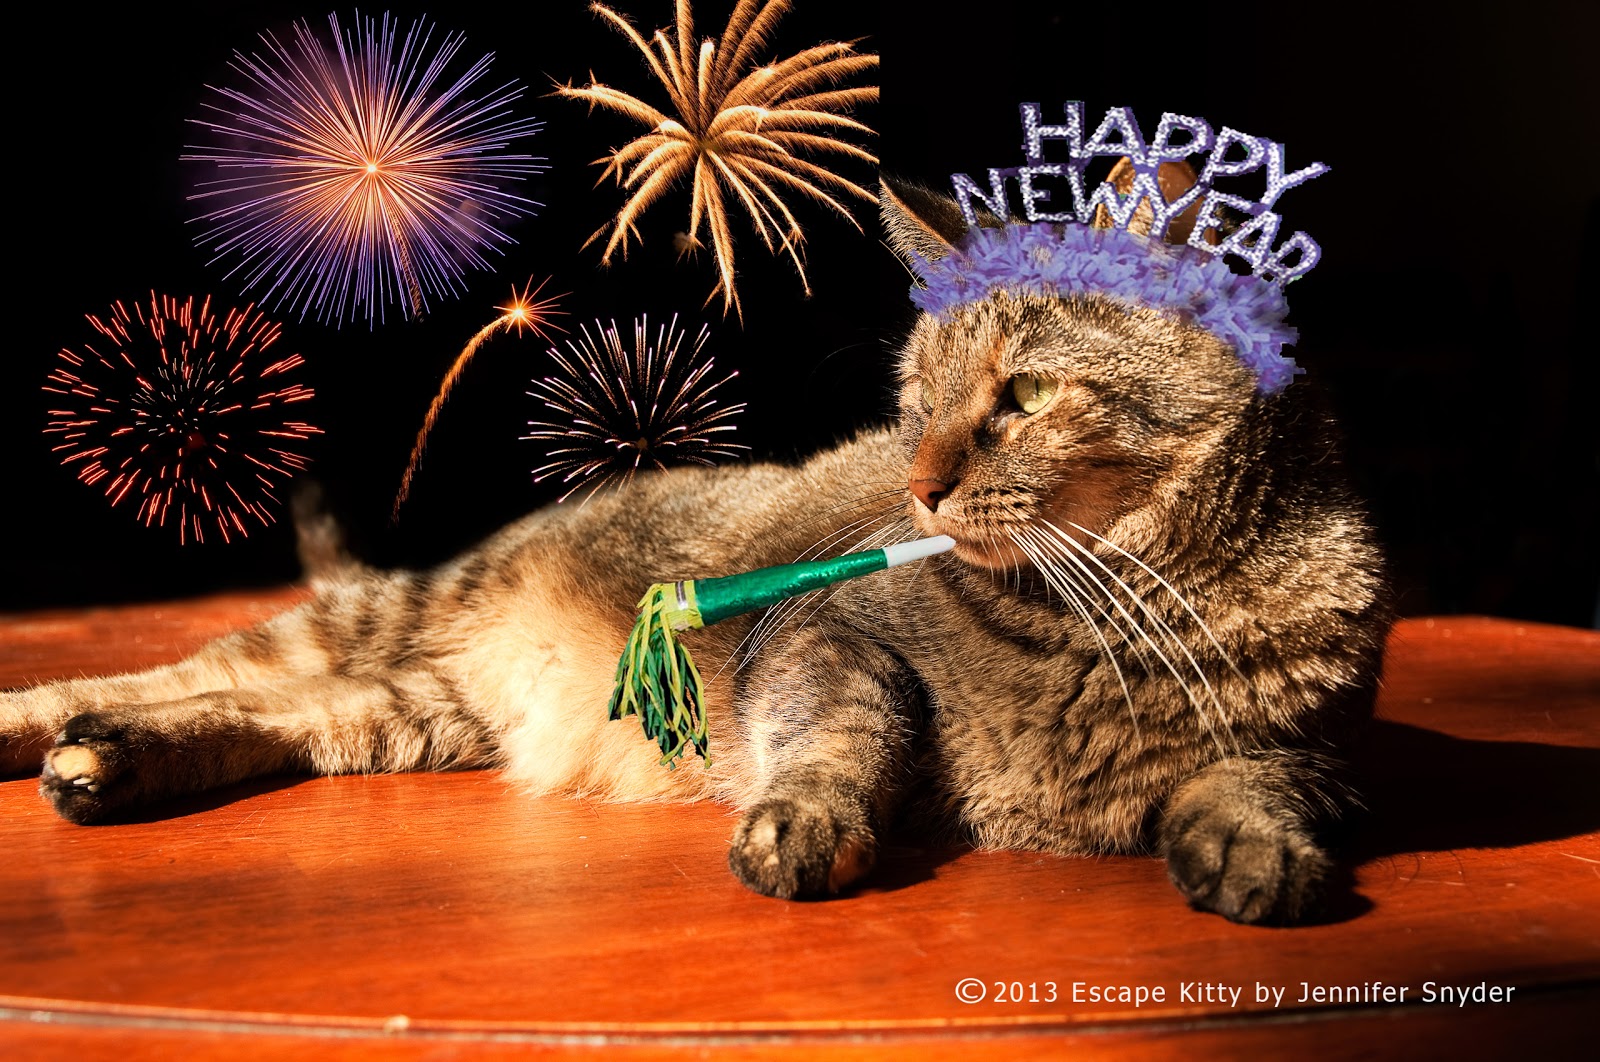 Escape Kitty's Scrappy Adventures Escape Kitty wishes you a Happy New Year